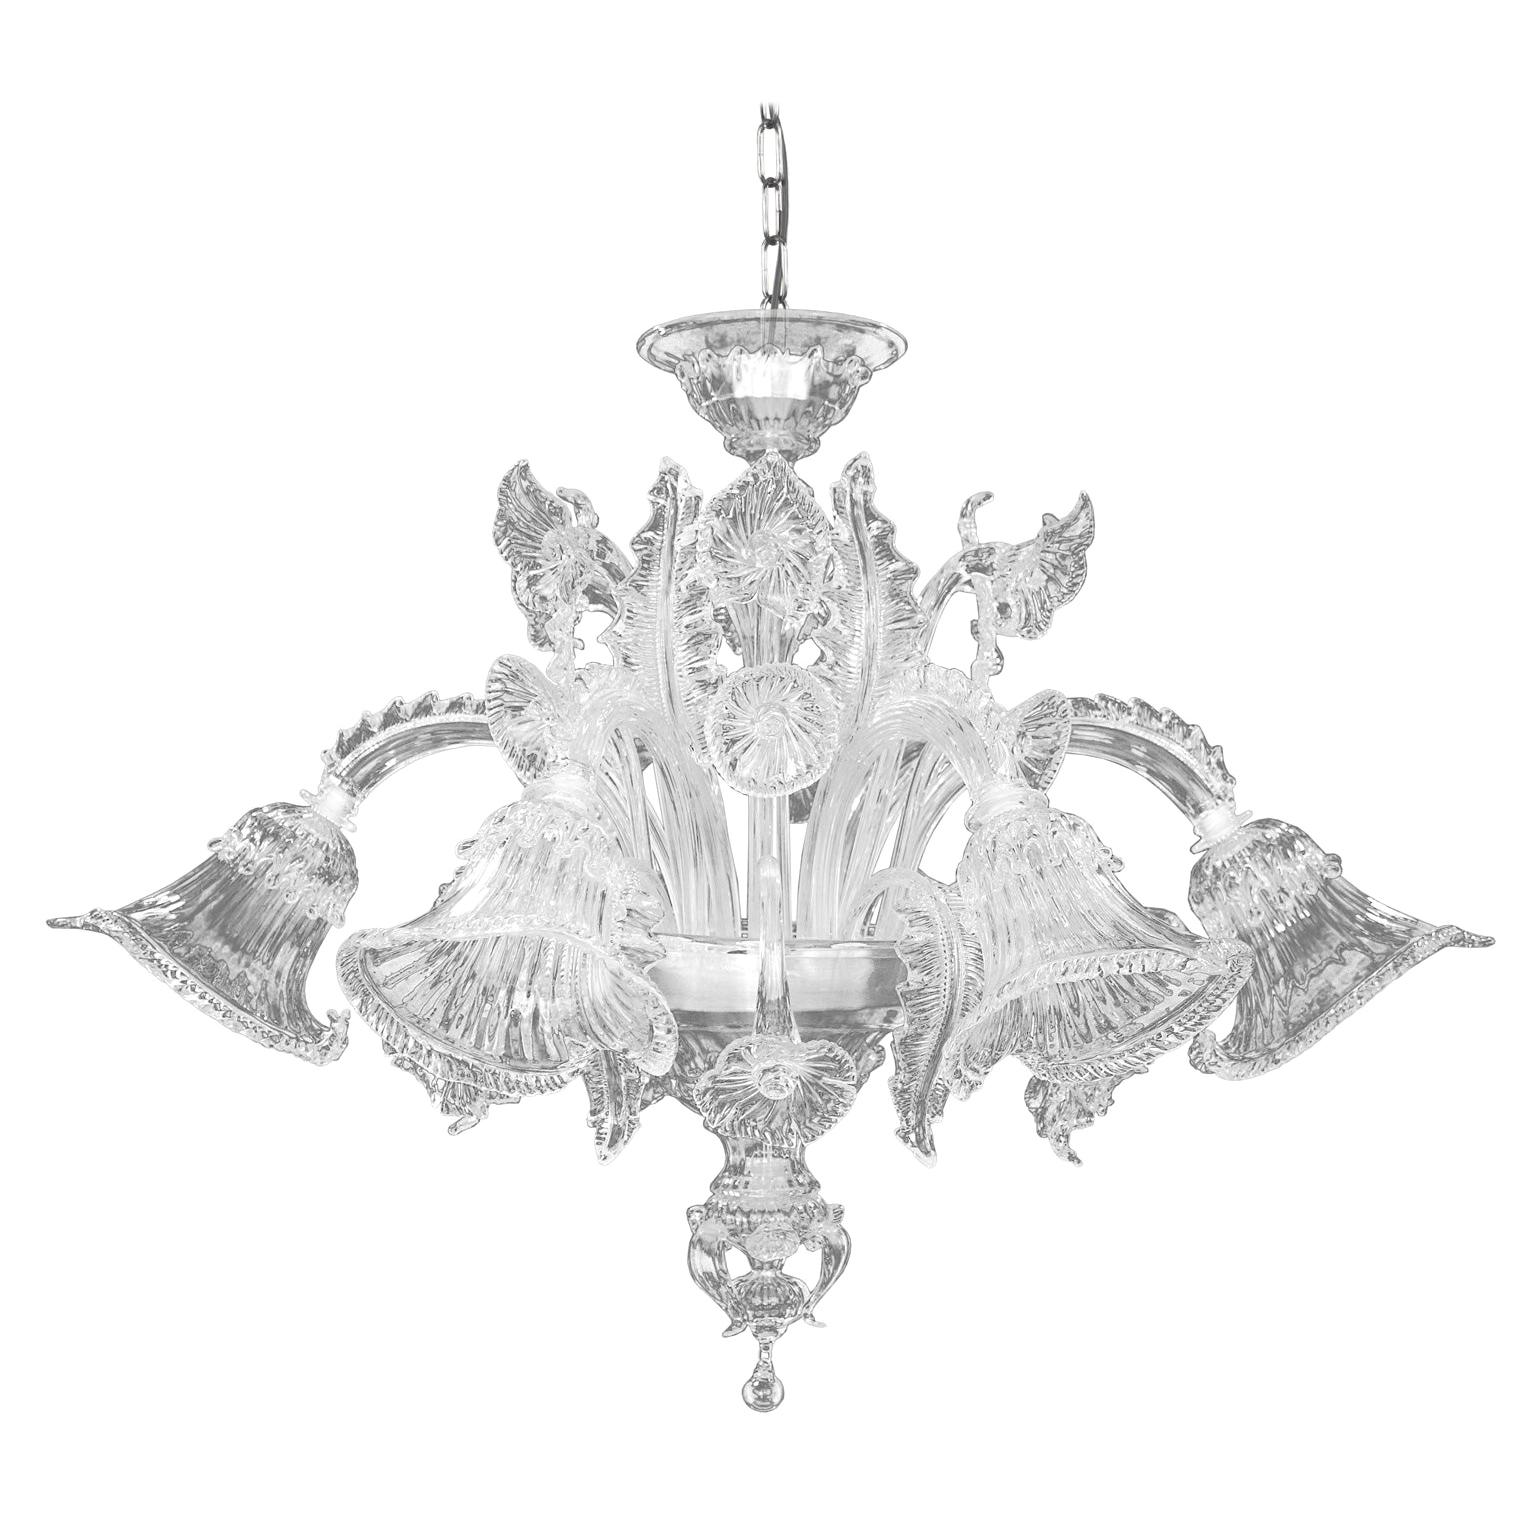 Artistic Ceiling Lamp 6 arms Crystal Murano Glass by Multiforme